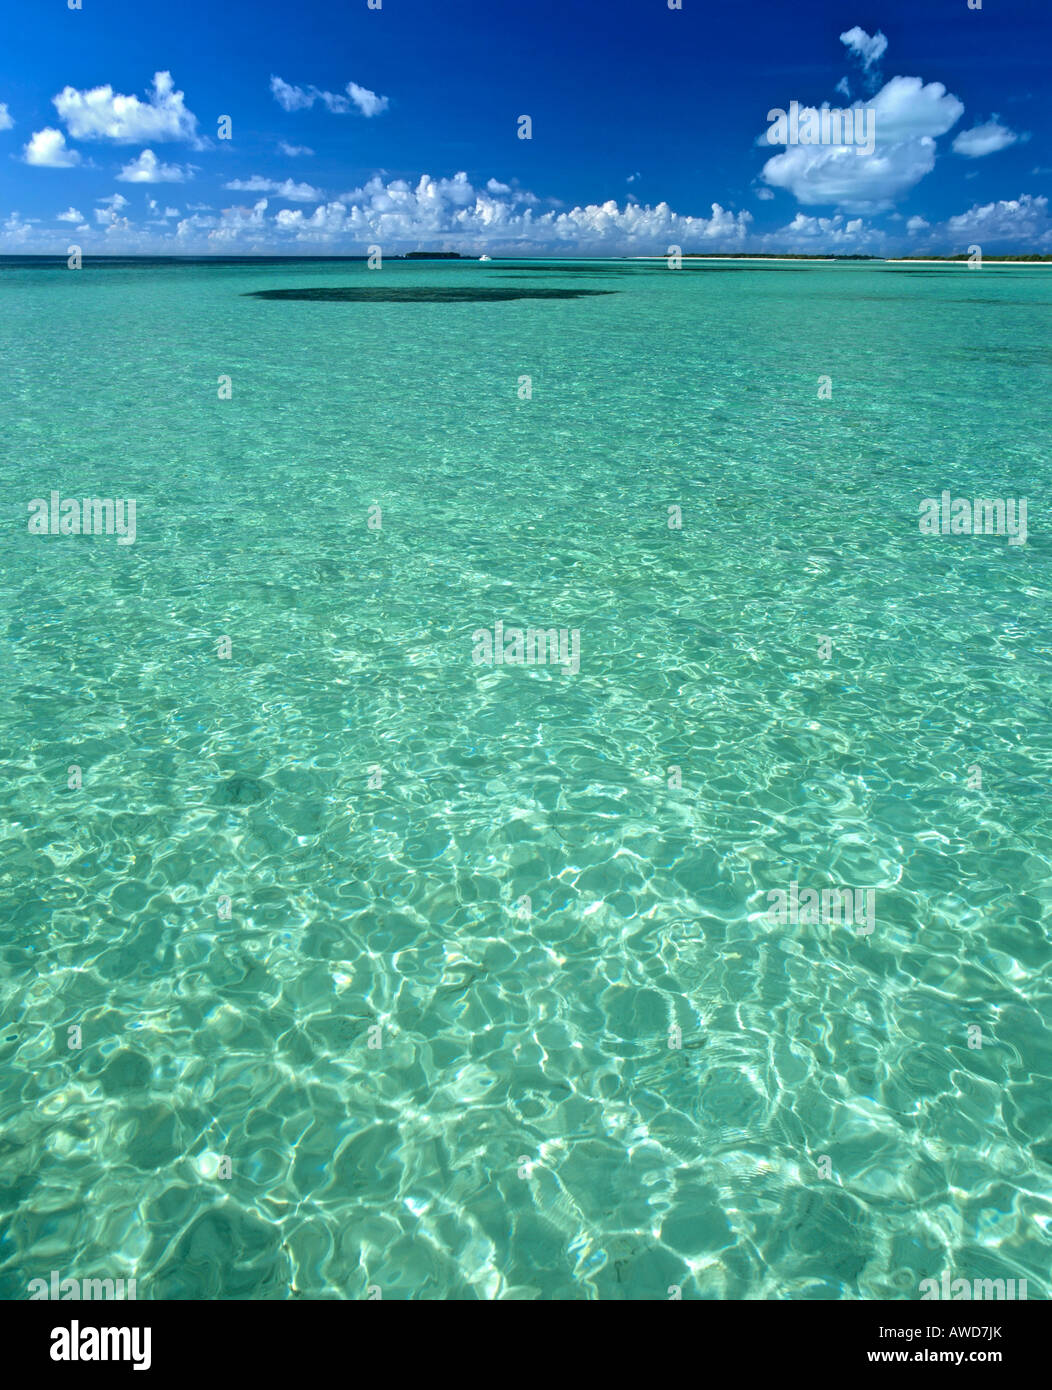 Turquoise waters, islands, view of clouds, Maldives, Indian Ocean Stock Photo